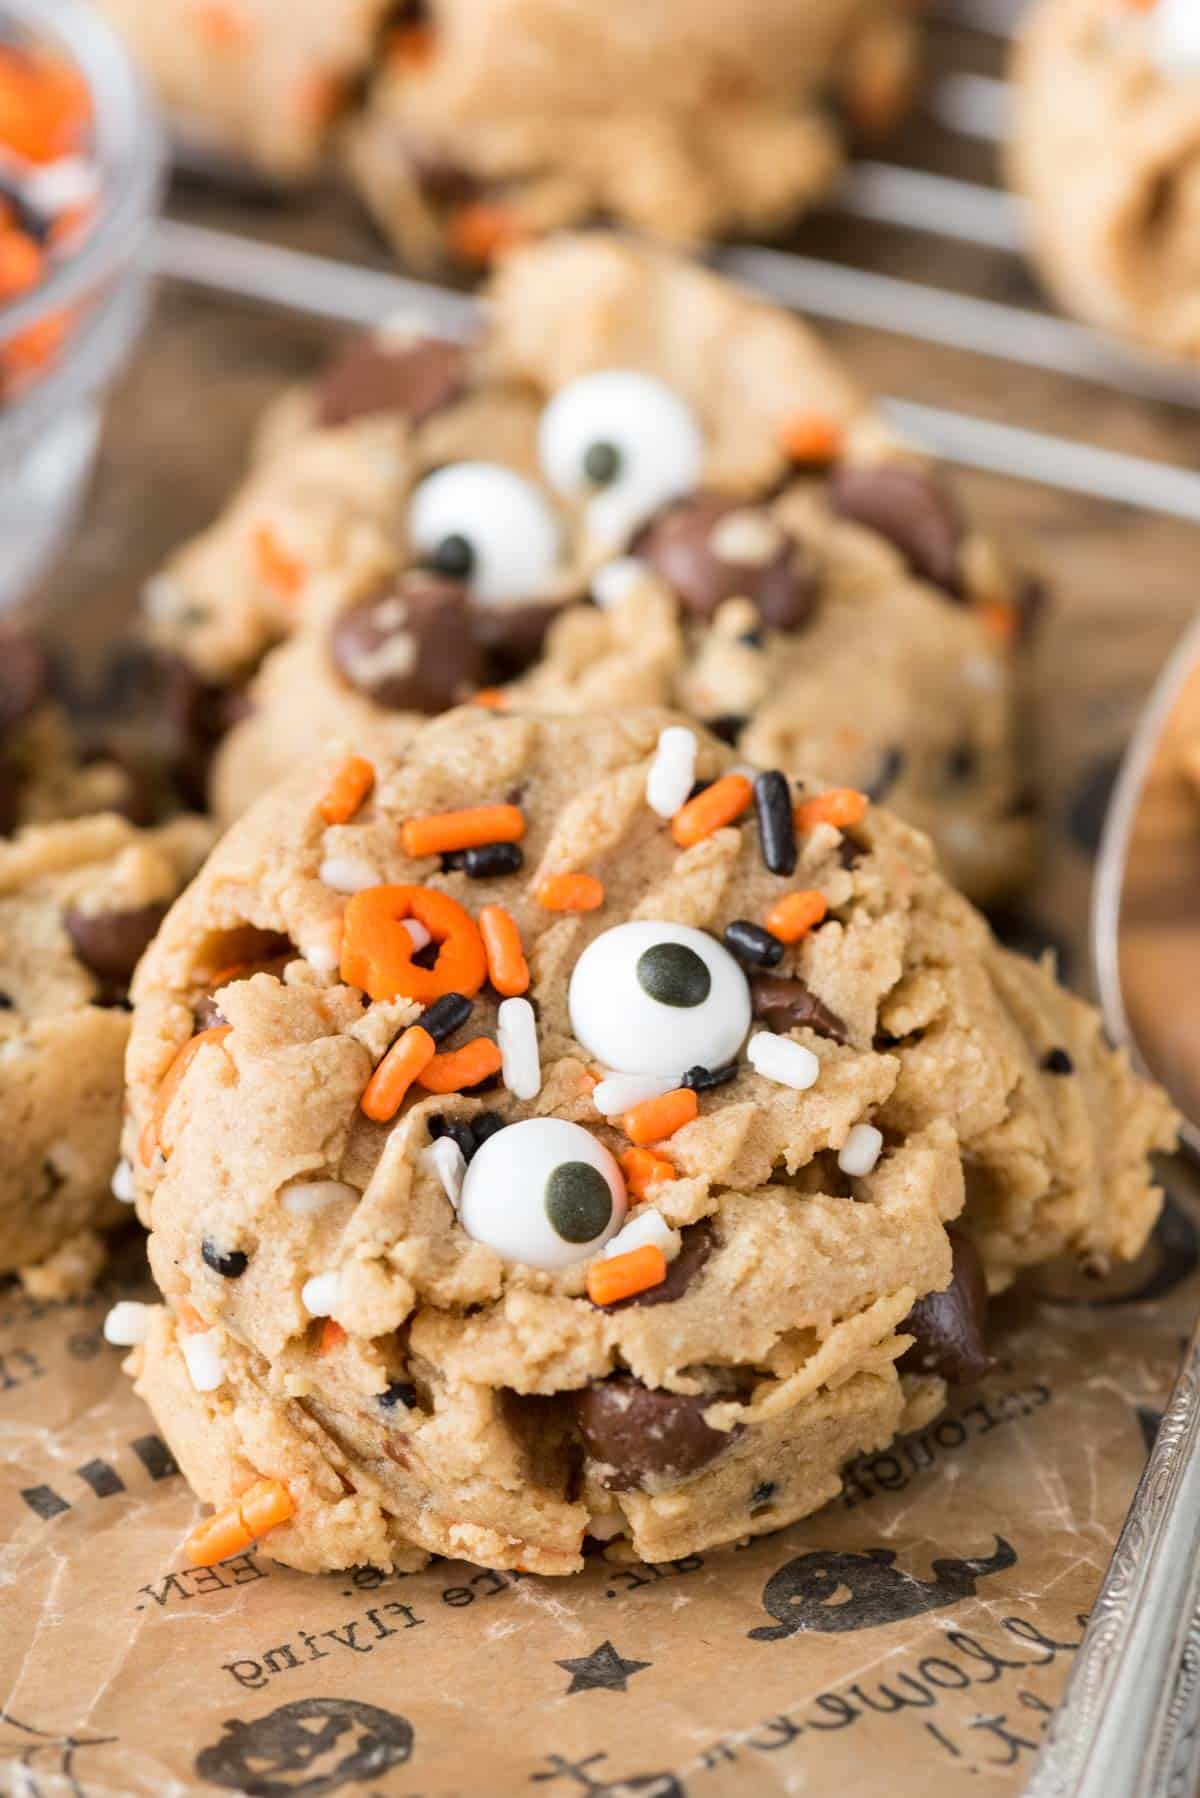 pudding cookies with orange and black sprinkles and candy eyes baked in.